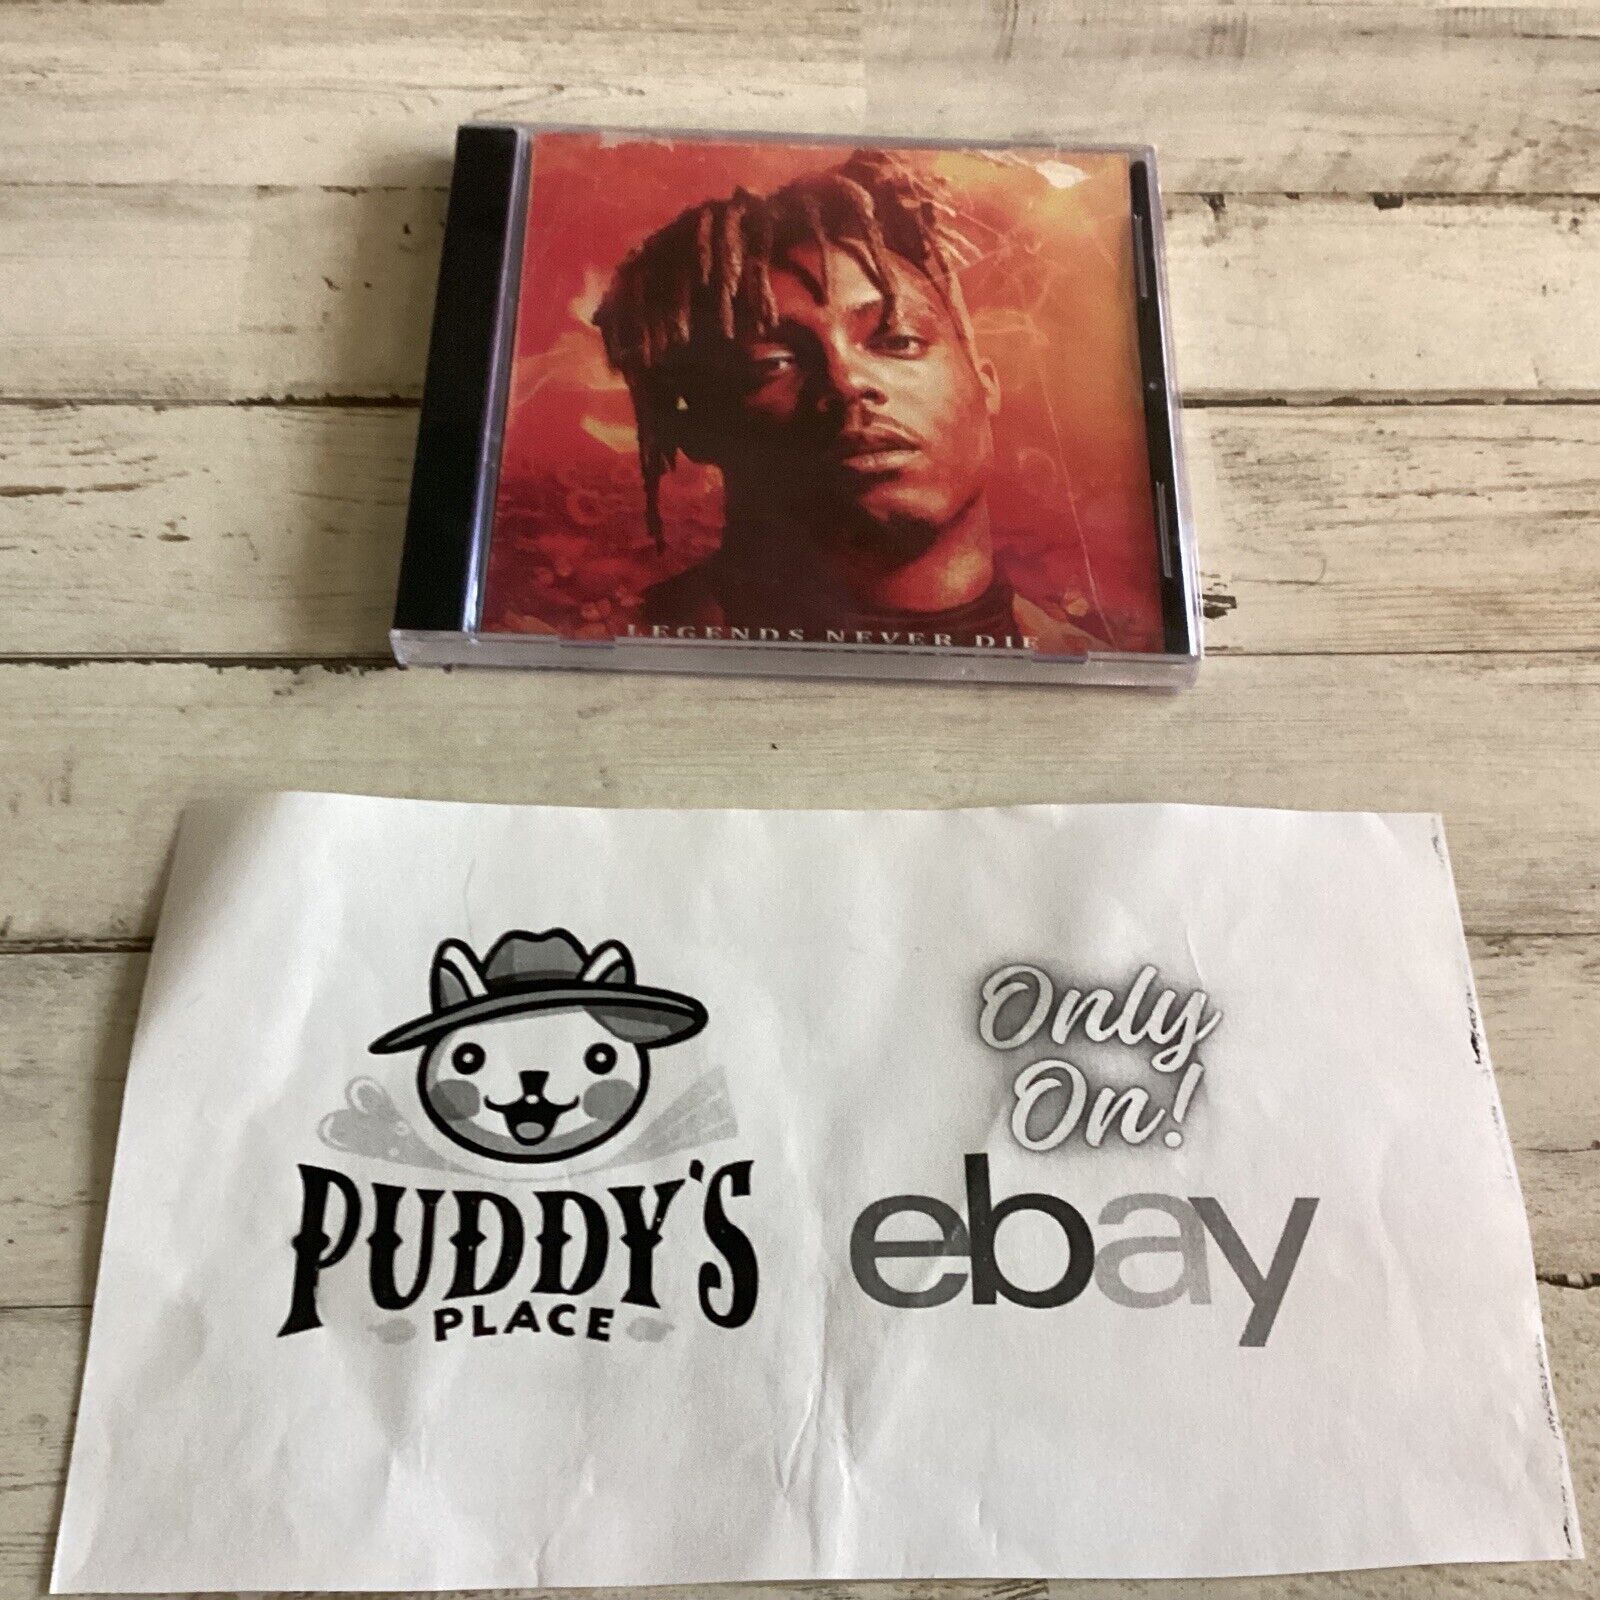 Juice WRLD LEGENDS NEVER DIE 2 CD Collectors Edition NEW FACTORY SEALED RARE